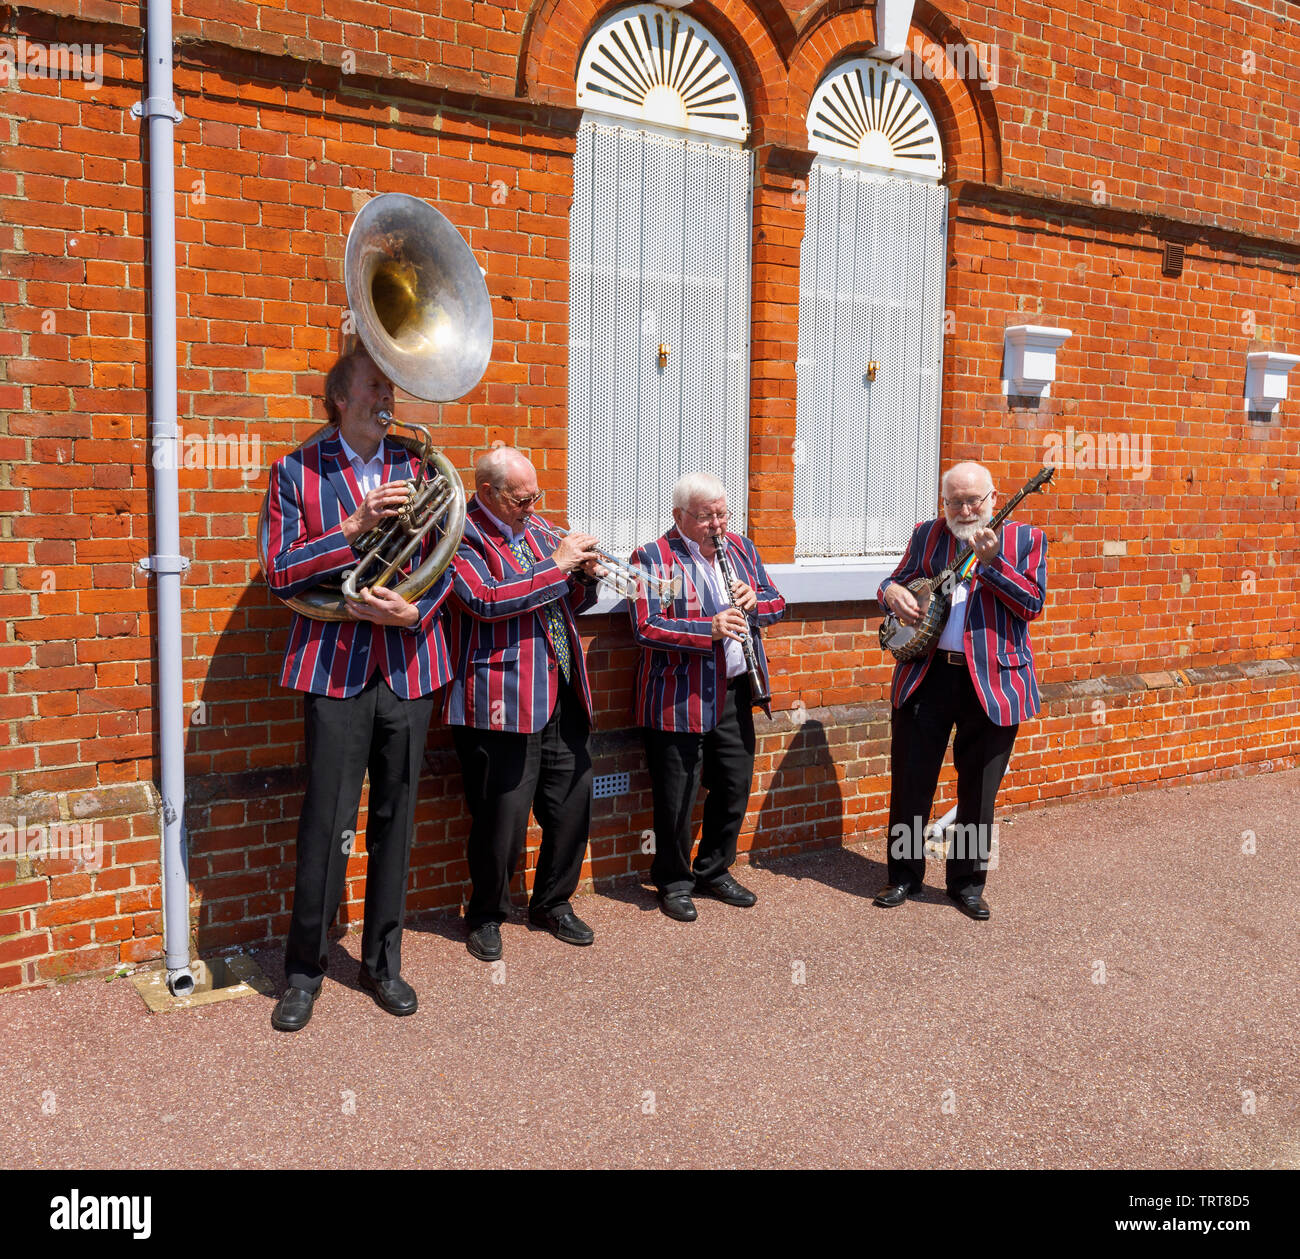 Elderly musicians from the Belmond Venice Simplon Orient Express in striped blazers entertain and perform at Folkestone West railway station, Kent Stock Photo